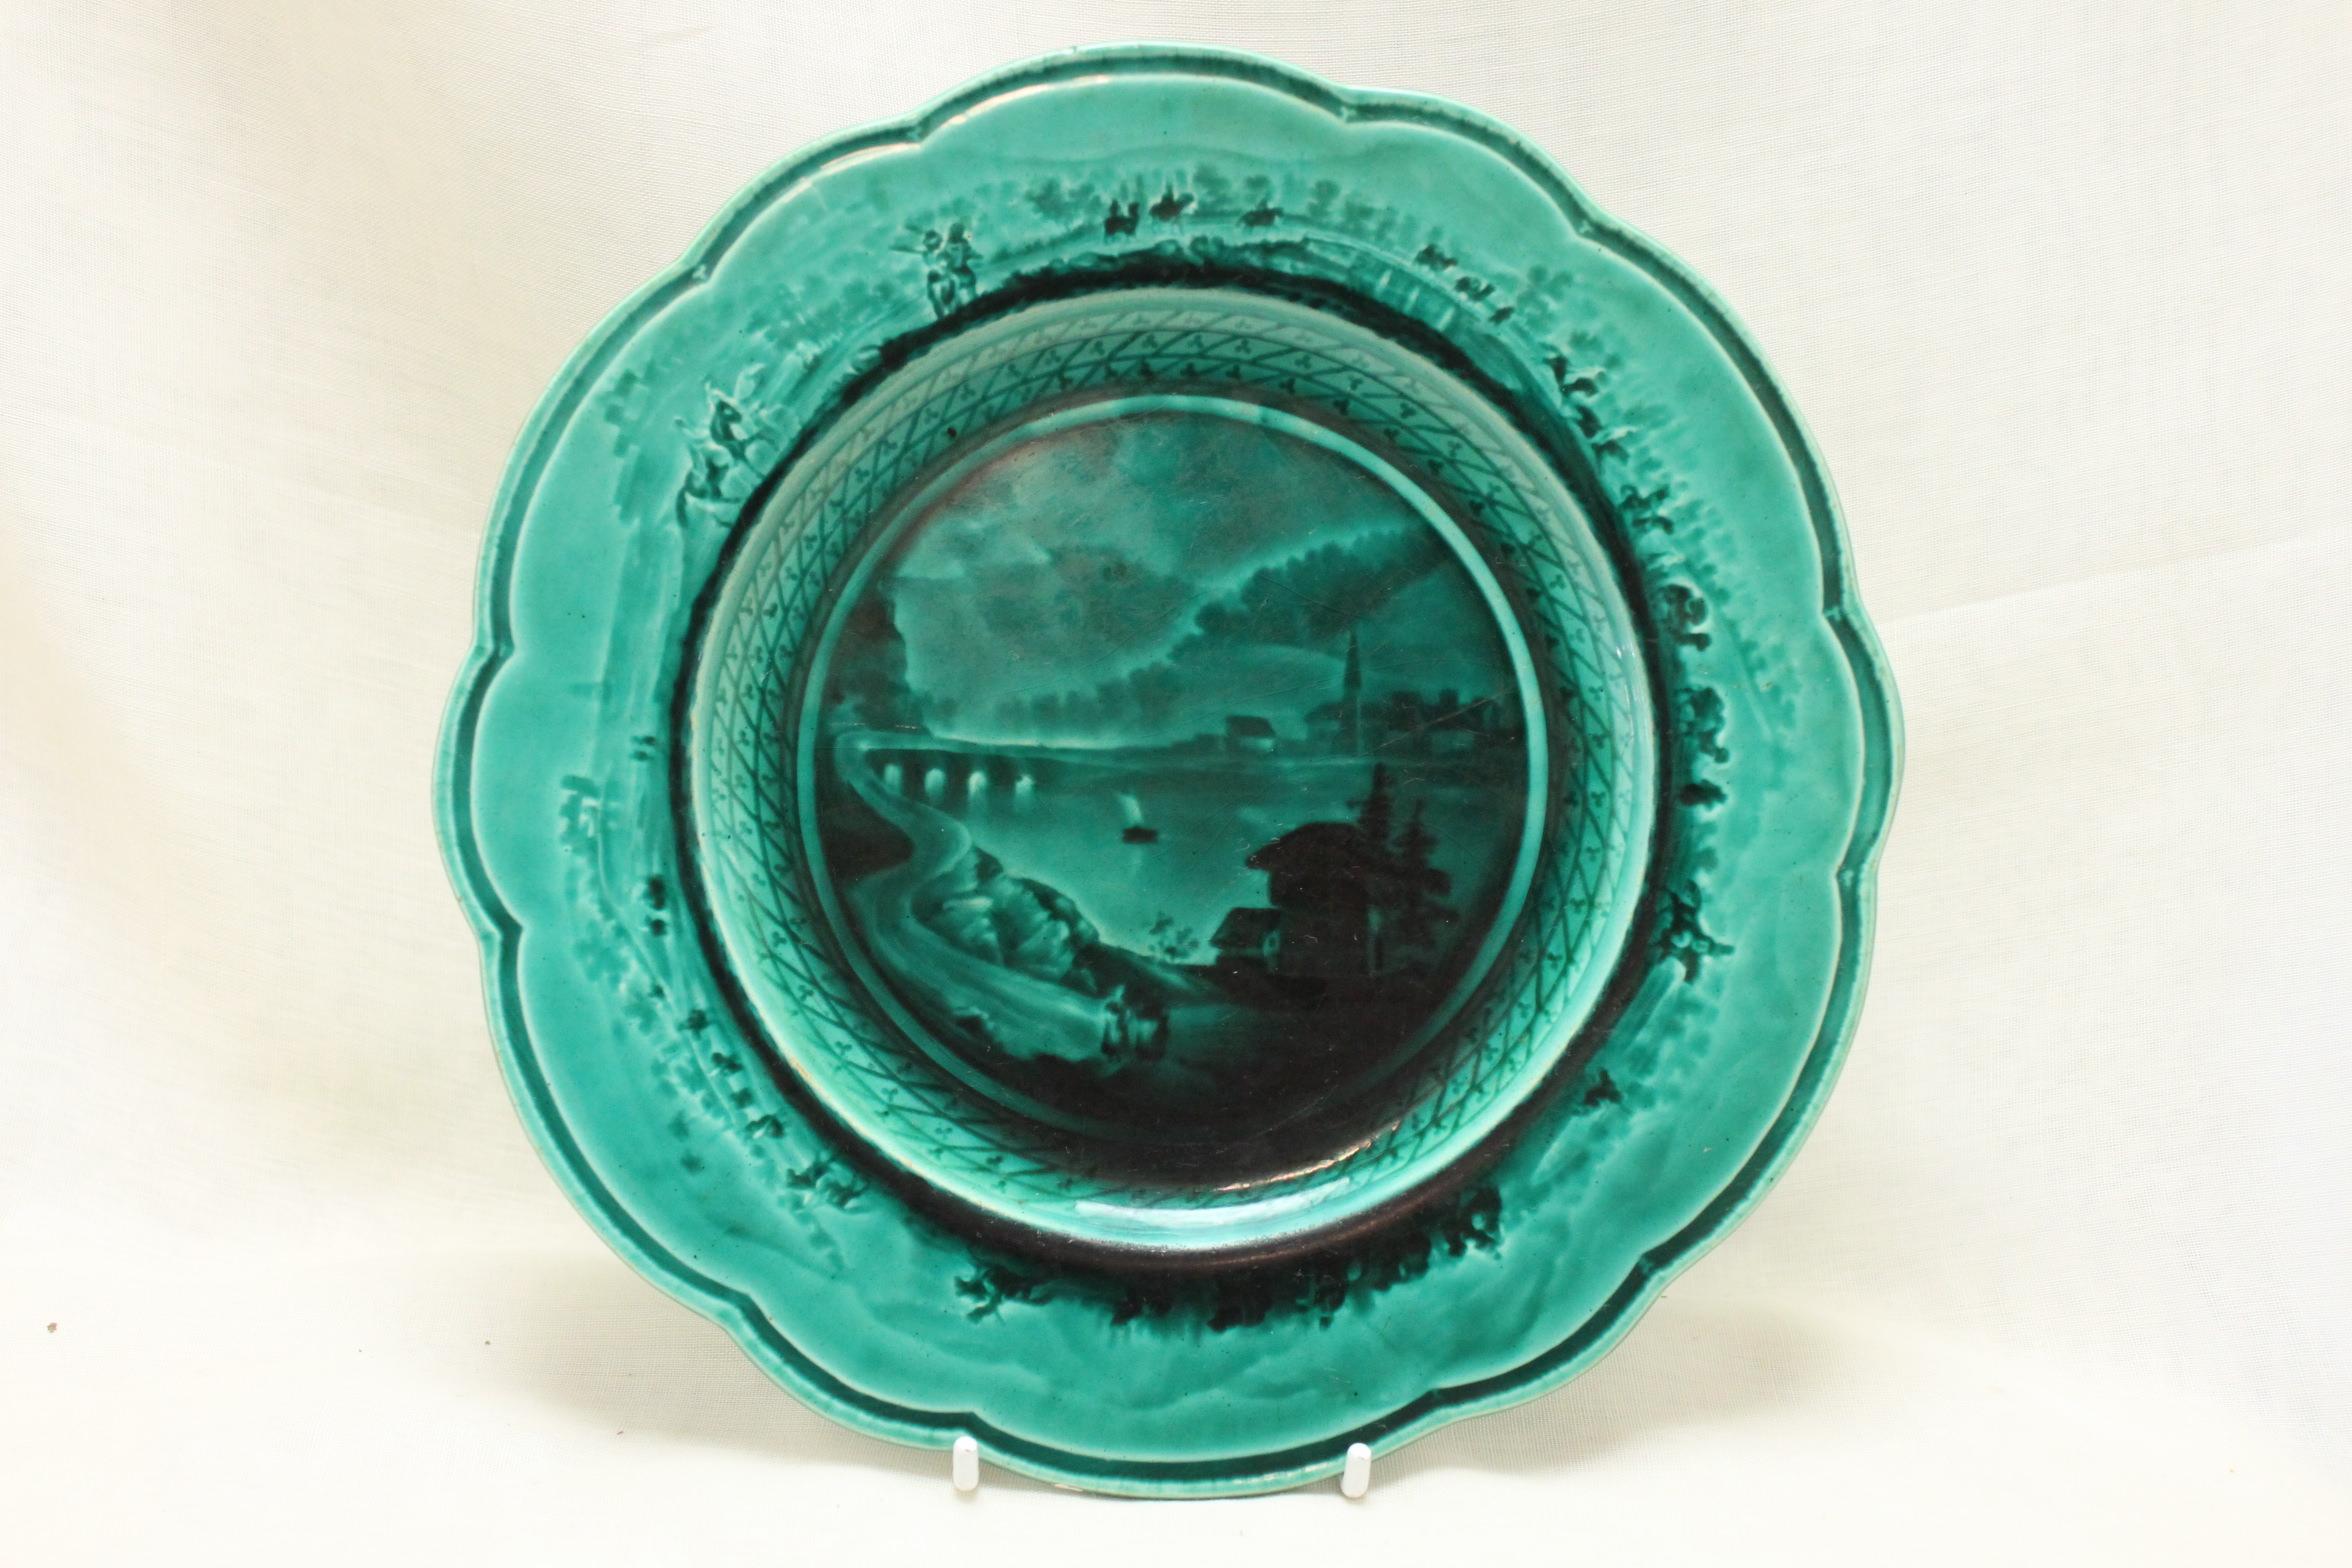 The decoration on this pair of Email Ombrant dessert plates from the Rubelles factory is achieved using graduated intaglio designs that are then flooded with the glaze to give form to the design. In some ways it is similar to the technique to create